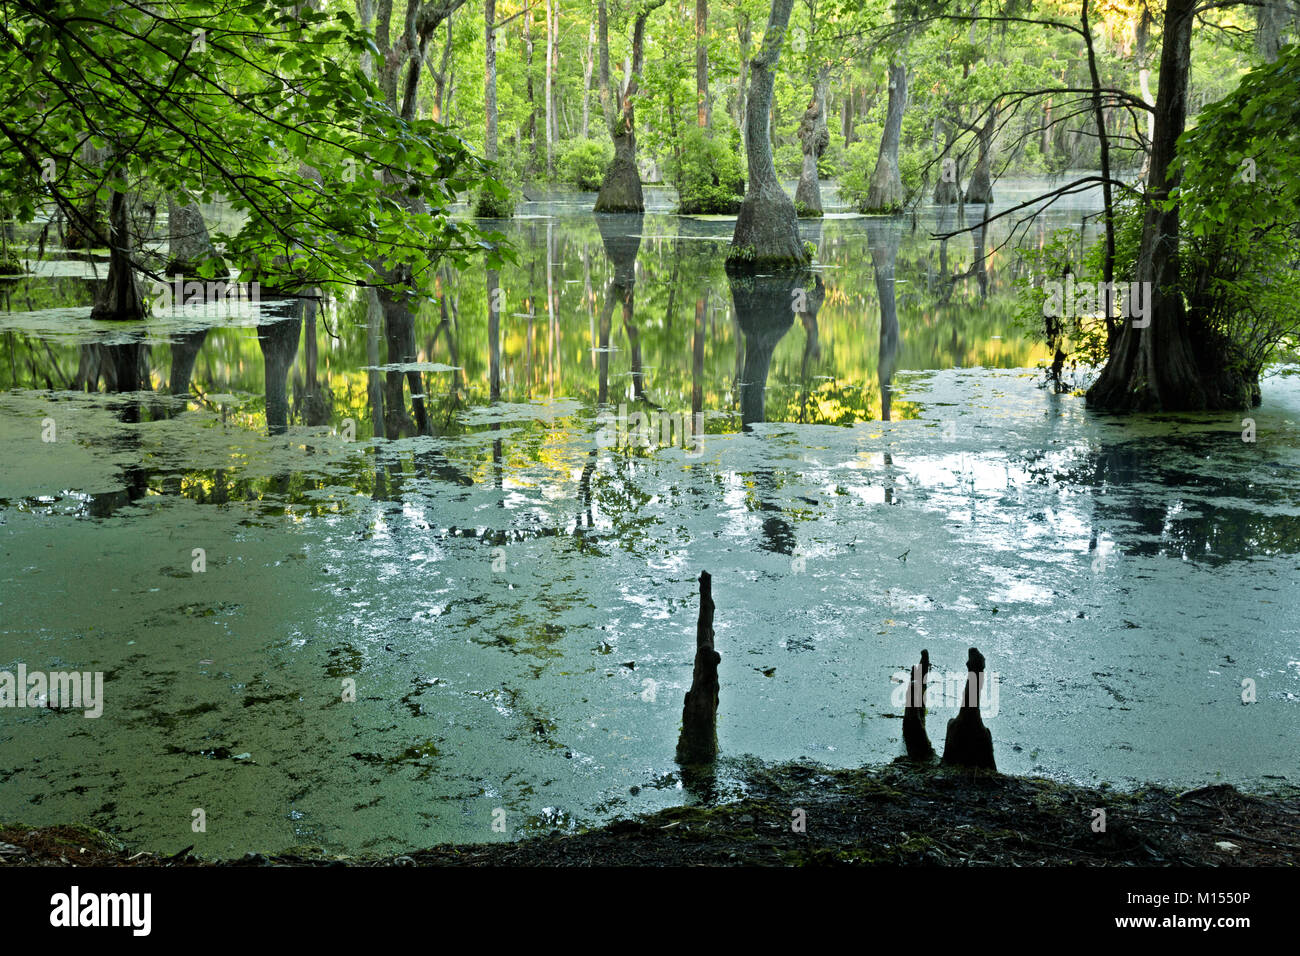 NC01490-00...NORTH CAROLINA - Knees of the Bald cypress trees and tupalo gum trees surrounded by a floating mat of duckweed reflected in the still wat Stock Photo